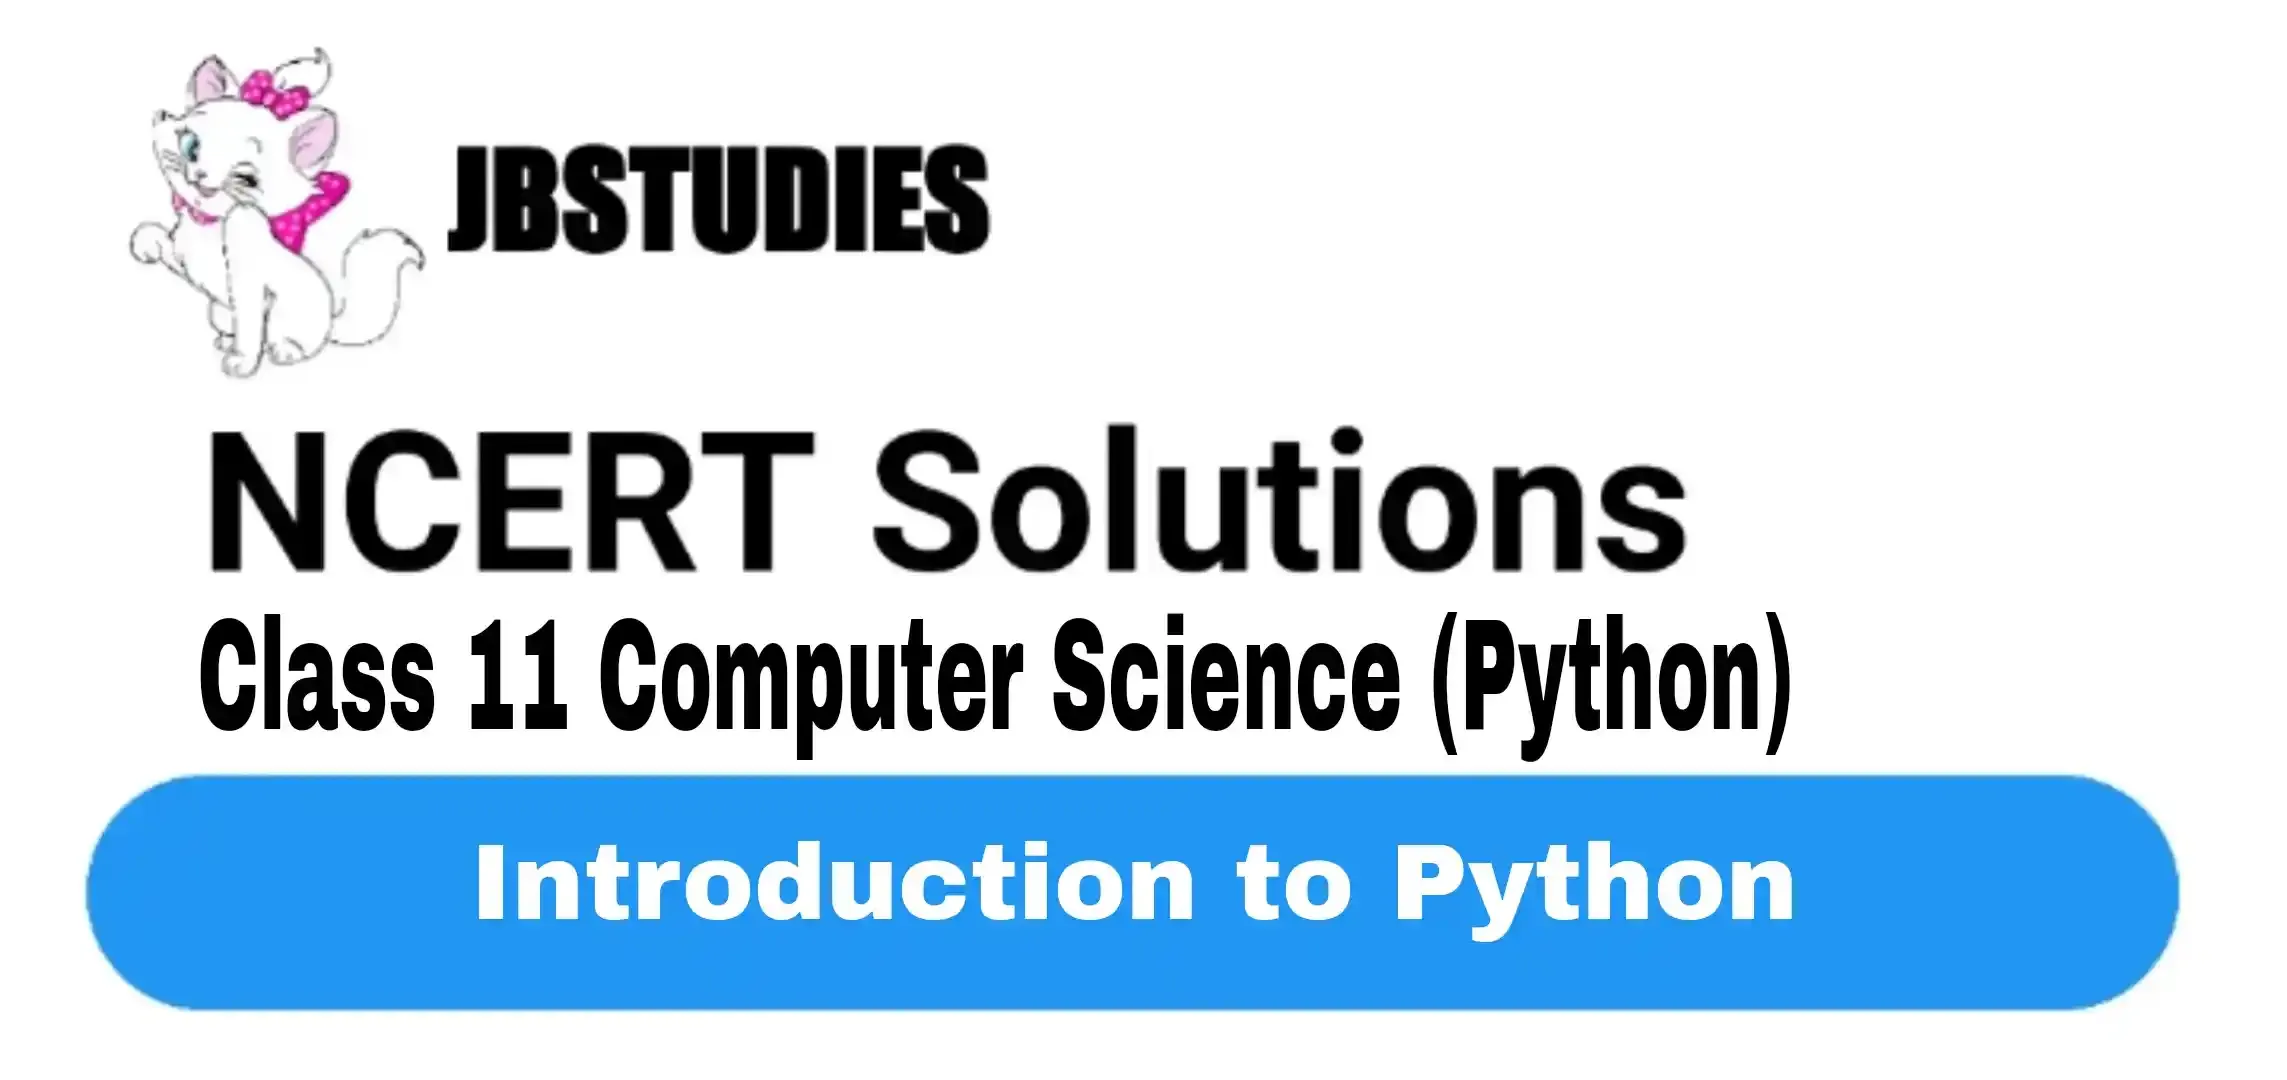 Solutions Class 11 Computer Science (Python) Chapter-7 (Introduction to Python)